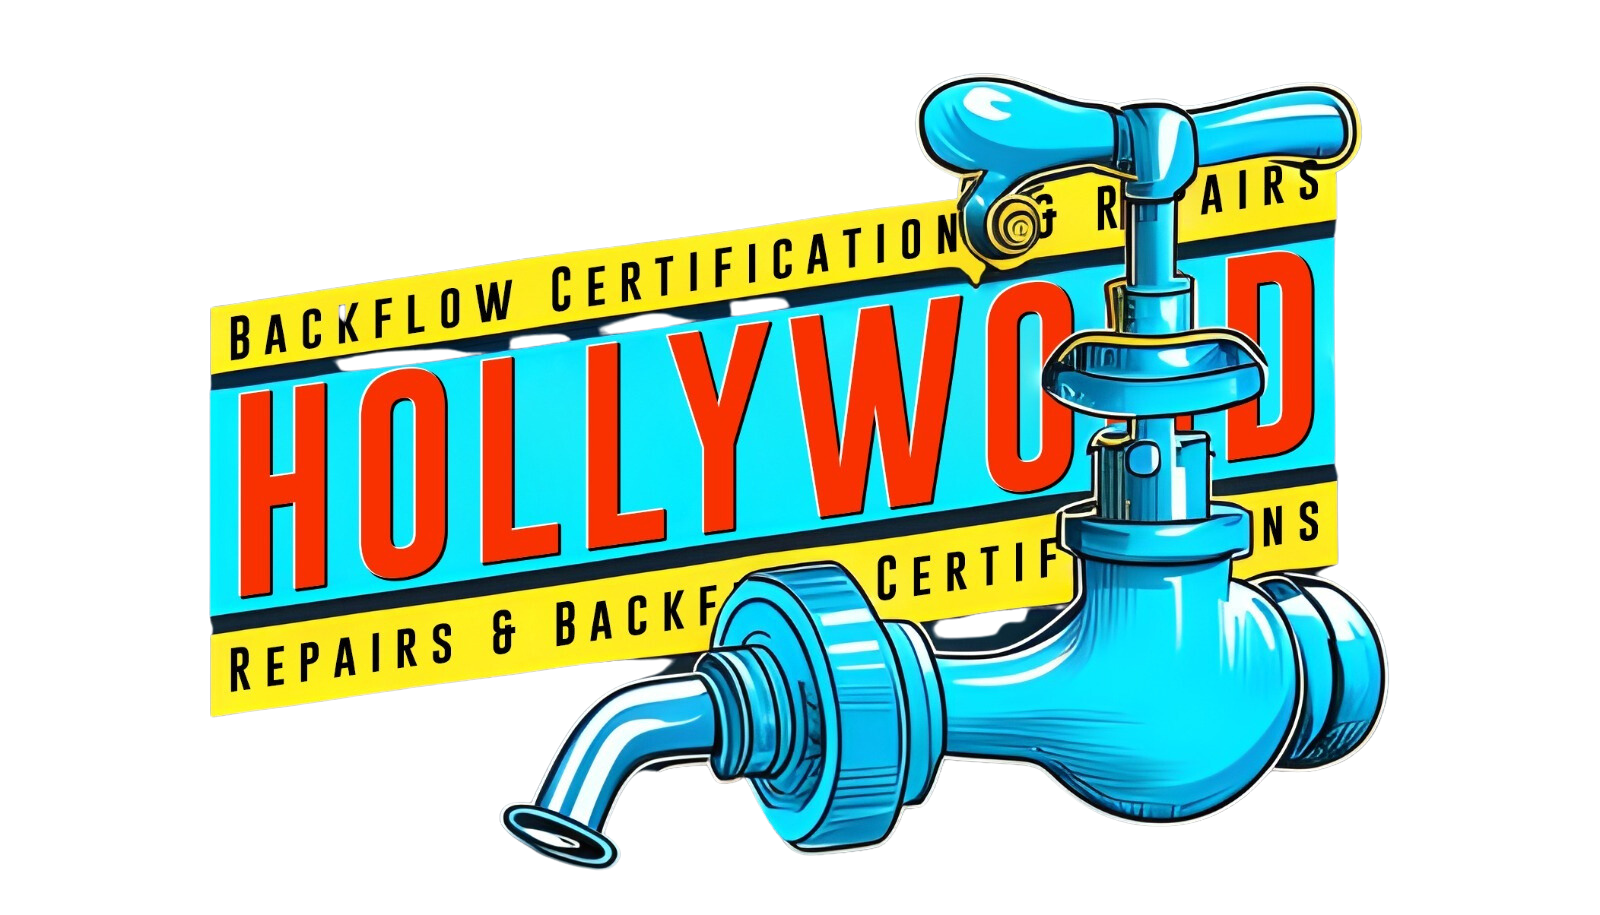 Reliable Repairs and Backflow Certifications in Hollywood